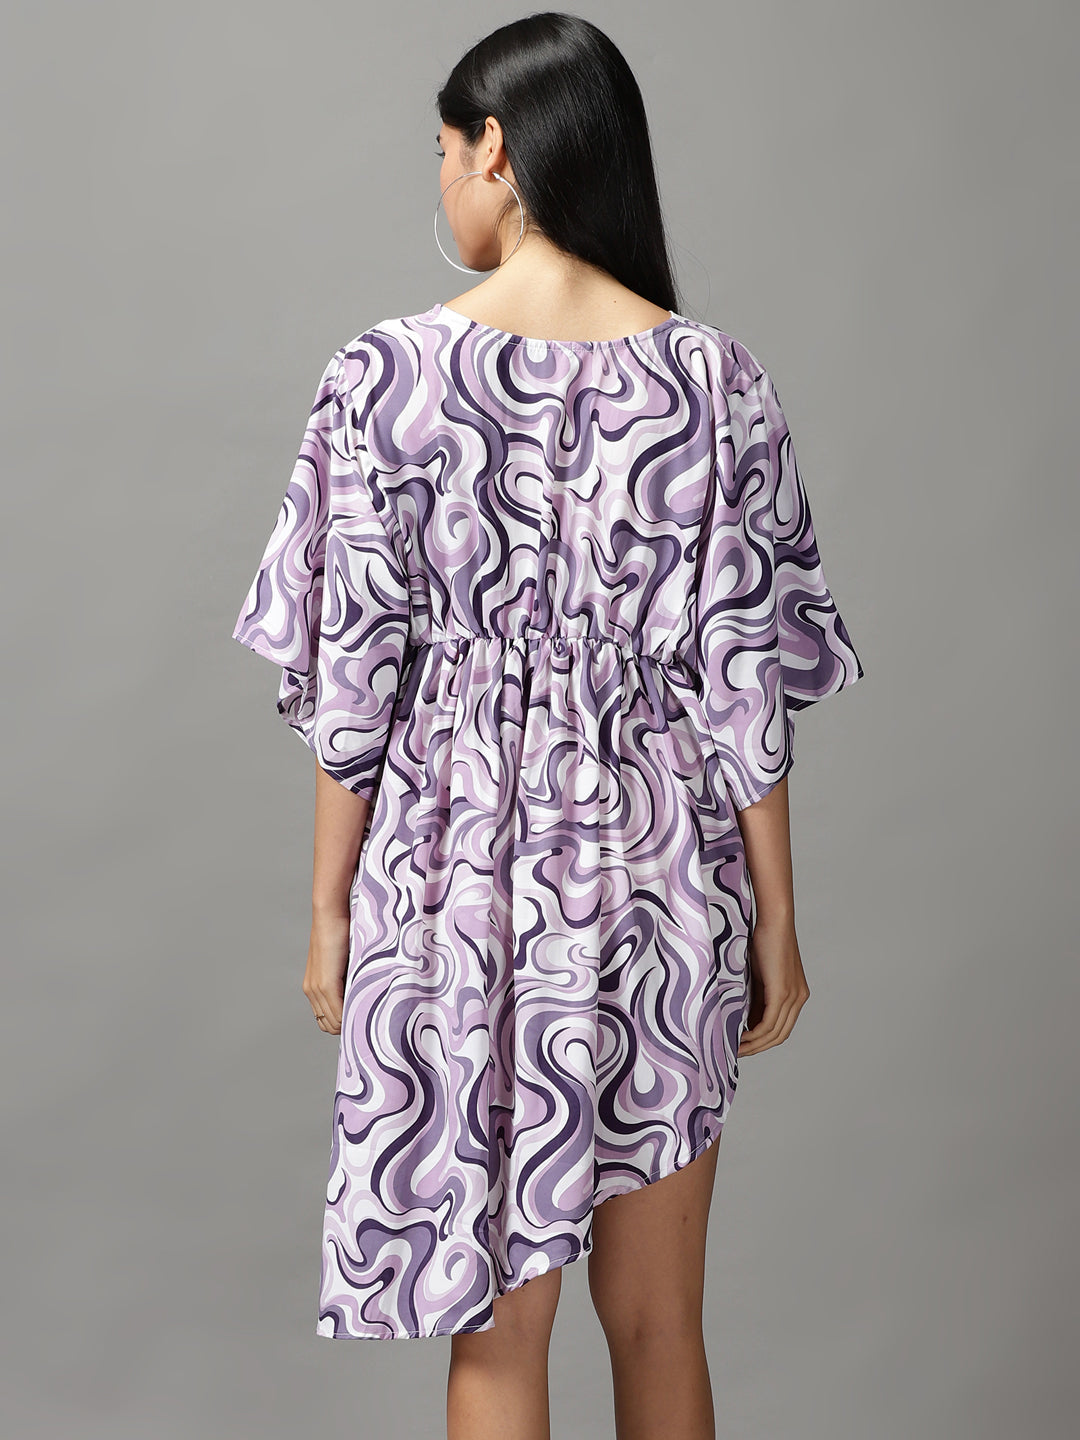 Women's Lavender Printed Fit and Flare Dress